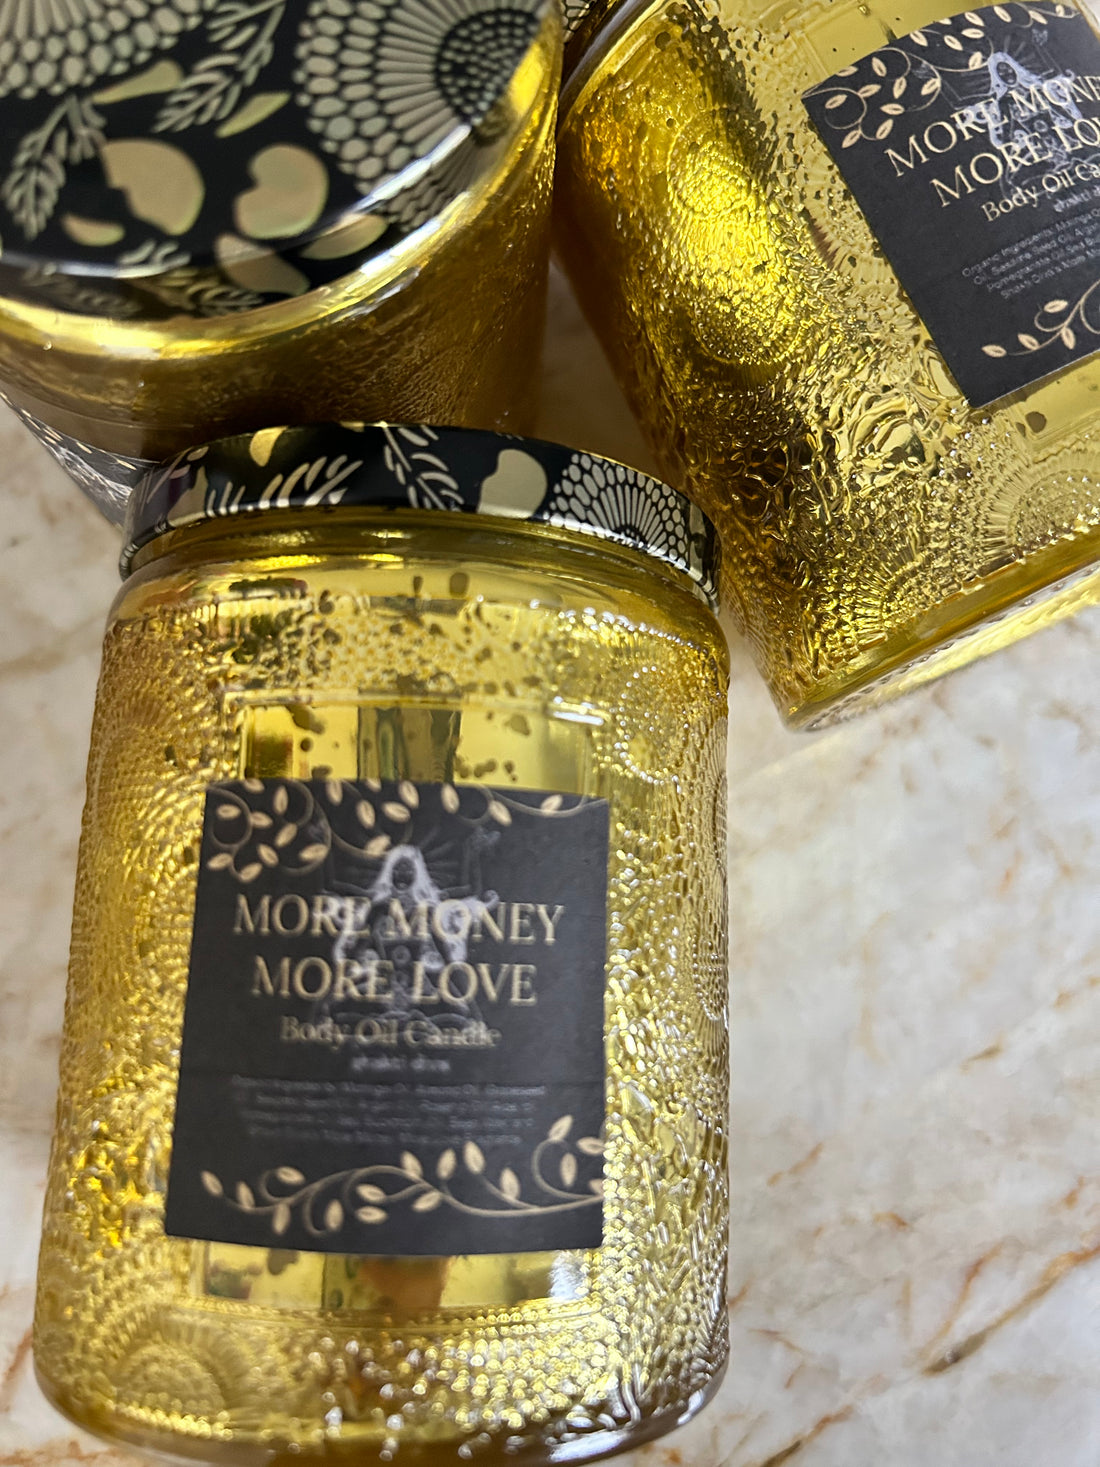 More Money More Love Body Oil Candle